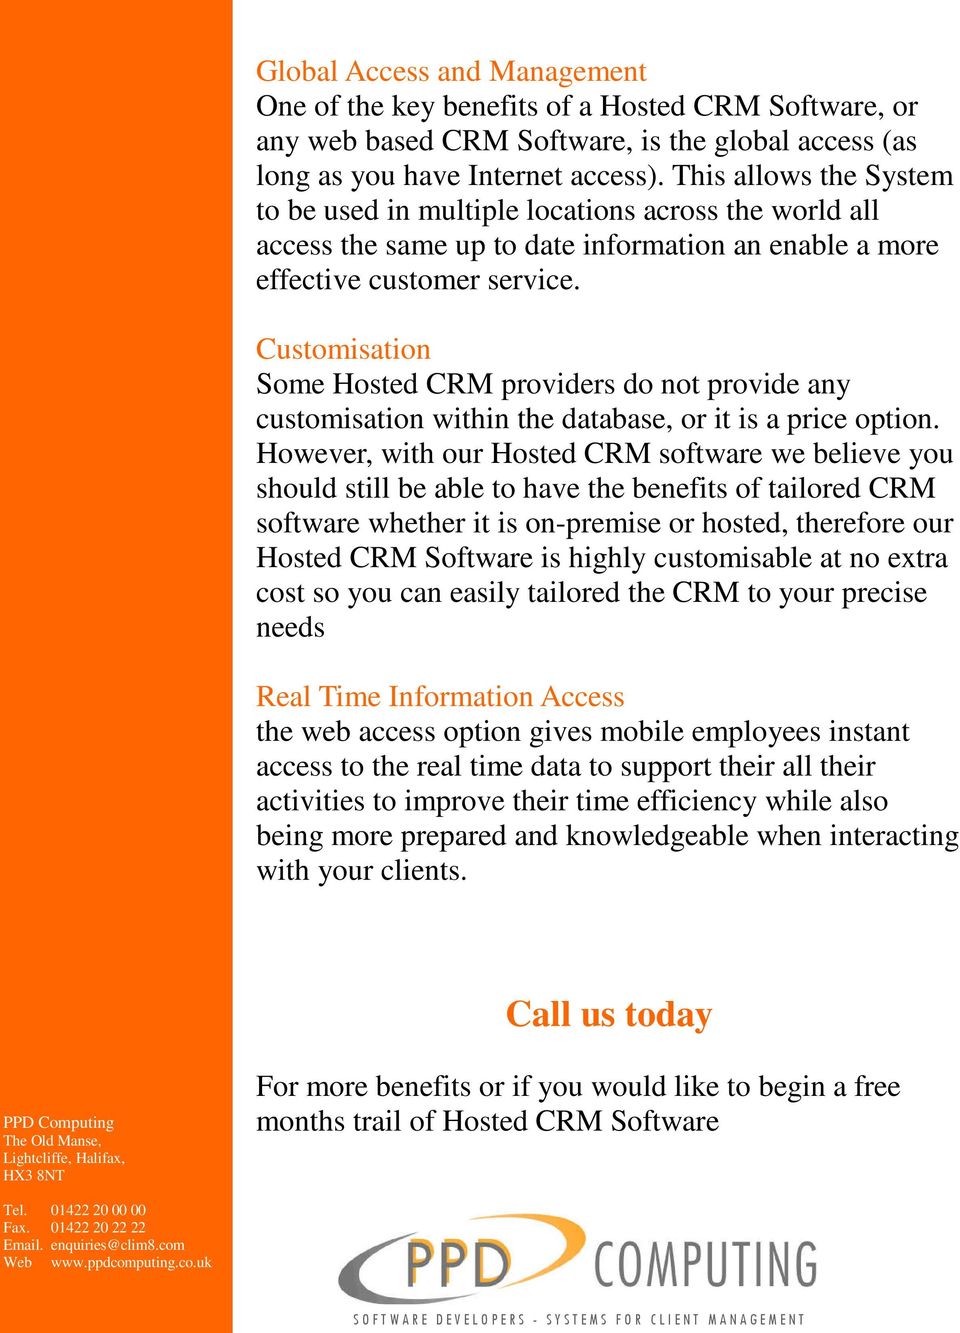 Customisation Some Hosted CRM providers do not provide any customisation within the database, or it is a price option.